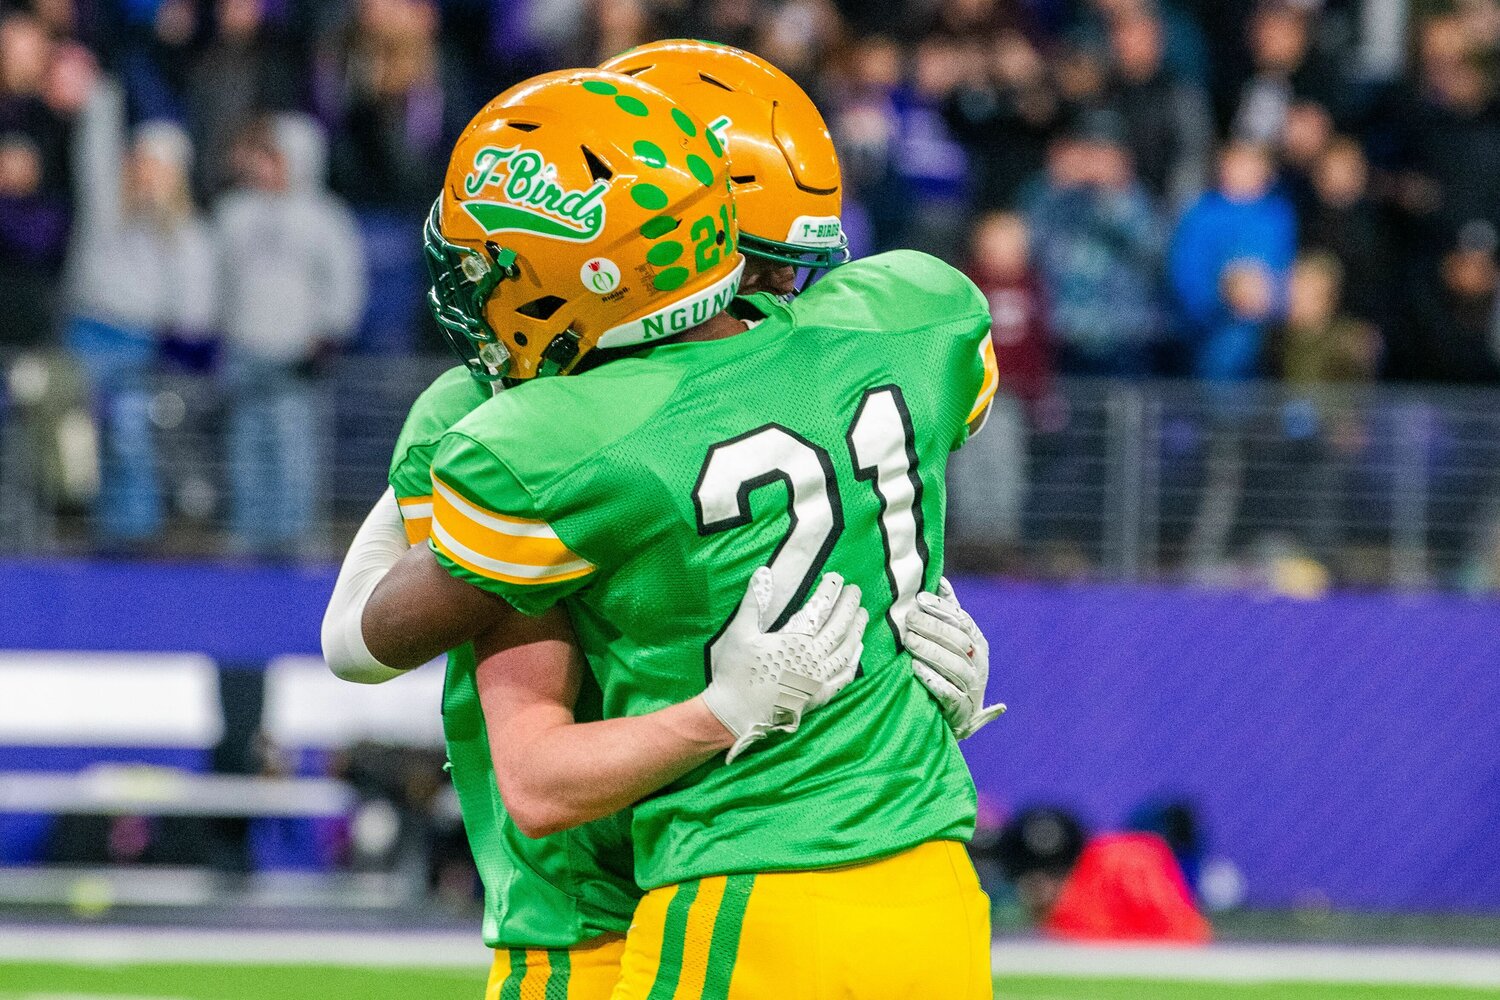 Tumwater’s David Malroy embraces his teammate after the Thunderbirds fell to the Anacortes Seahawks in the 2A State Championship game at Husky Stadium on Saturday, Dec. 2.